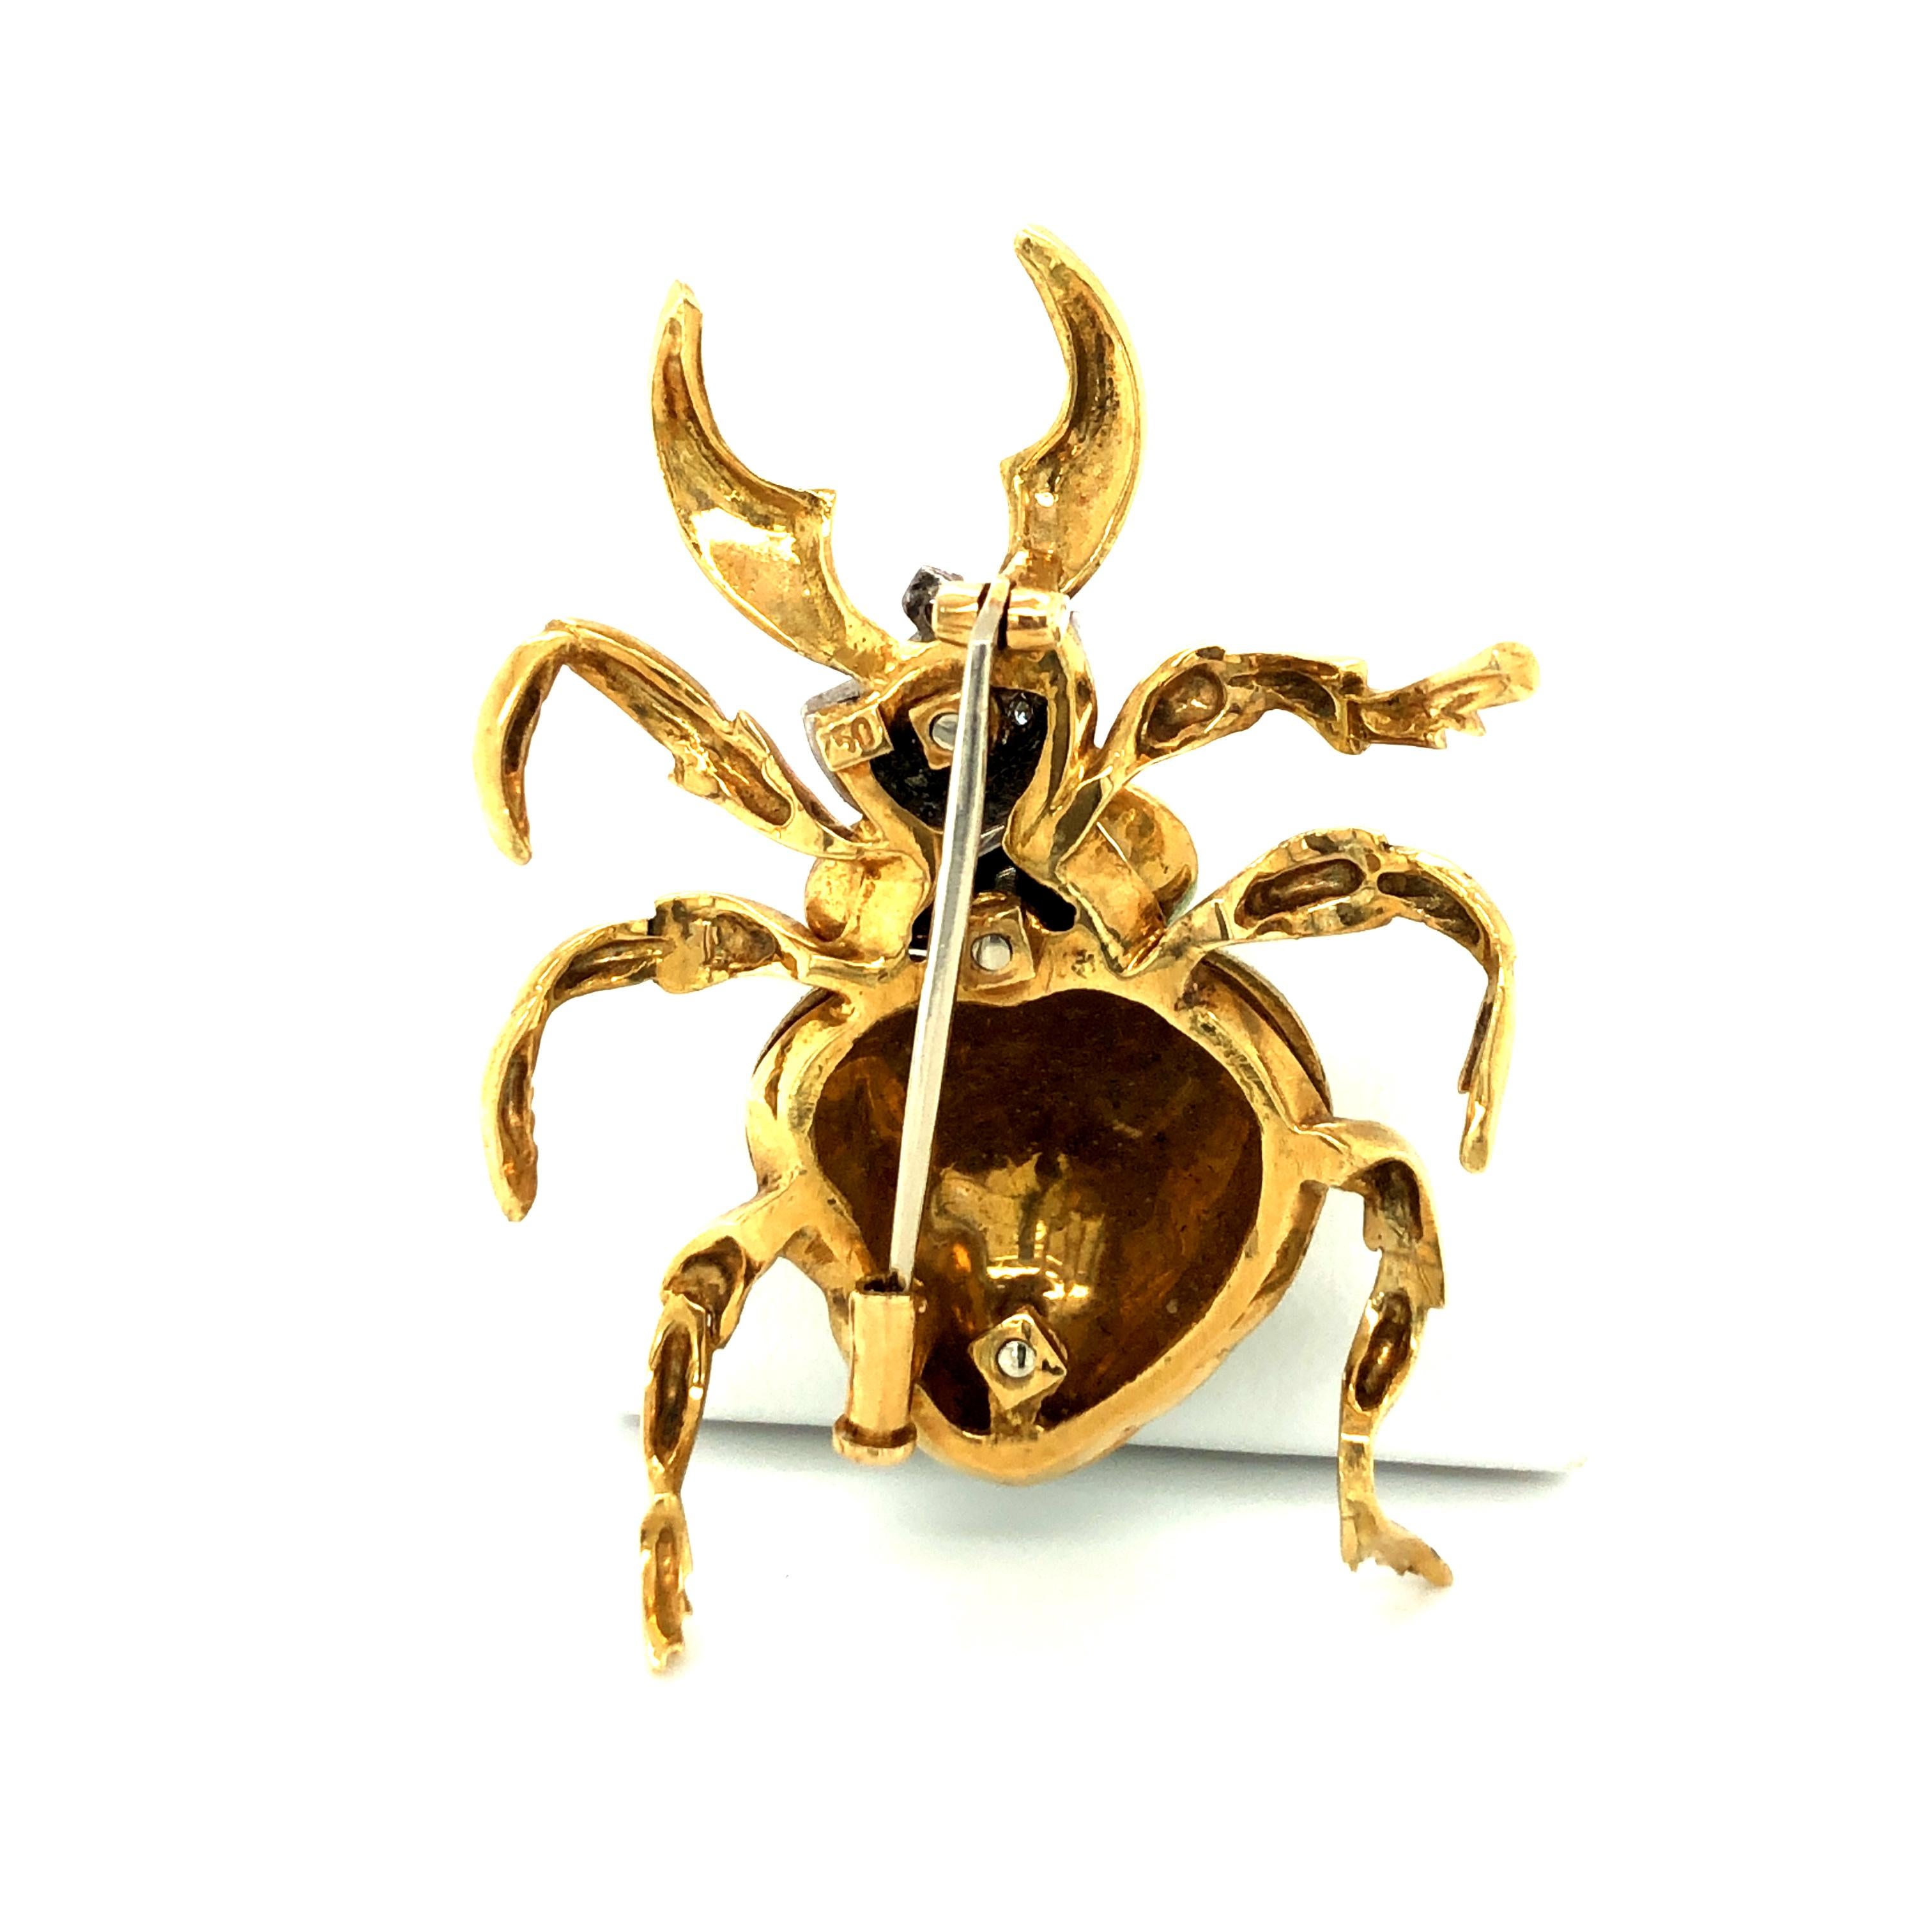 Stunning Enamel and Diamond Beetle Brooch in 18 Karat Yellow and White Gold 3